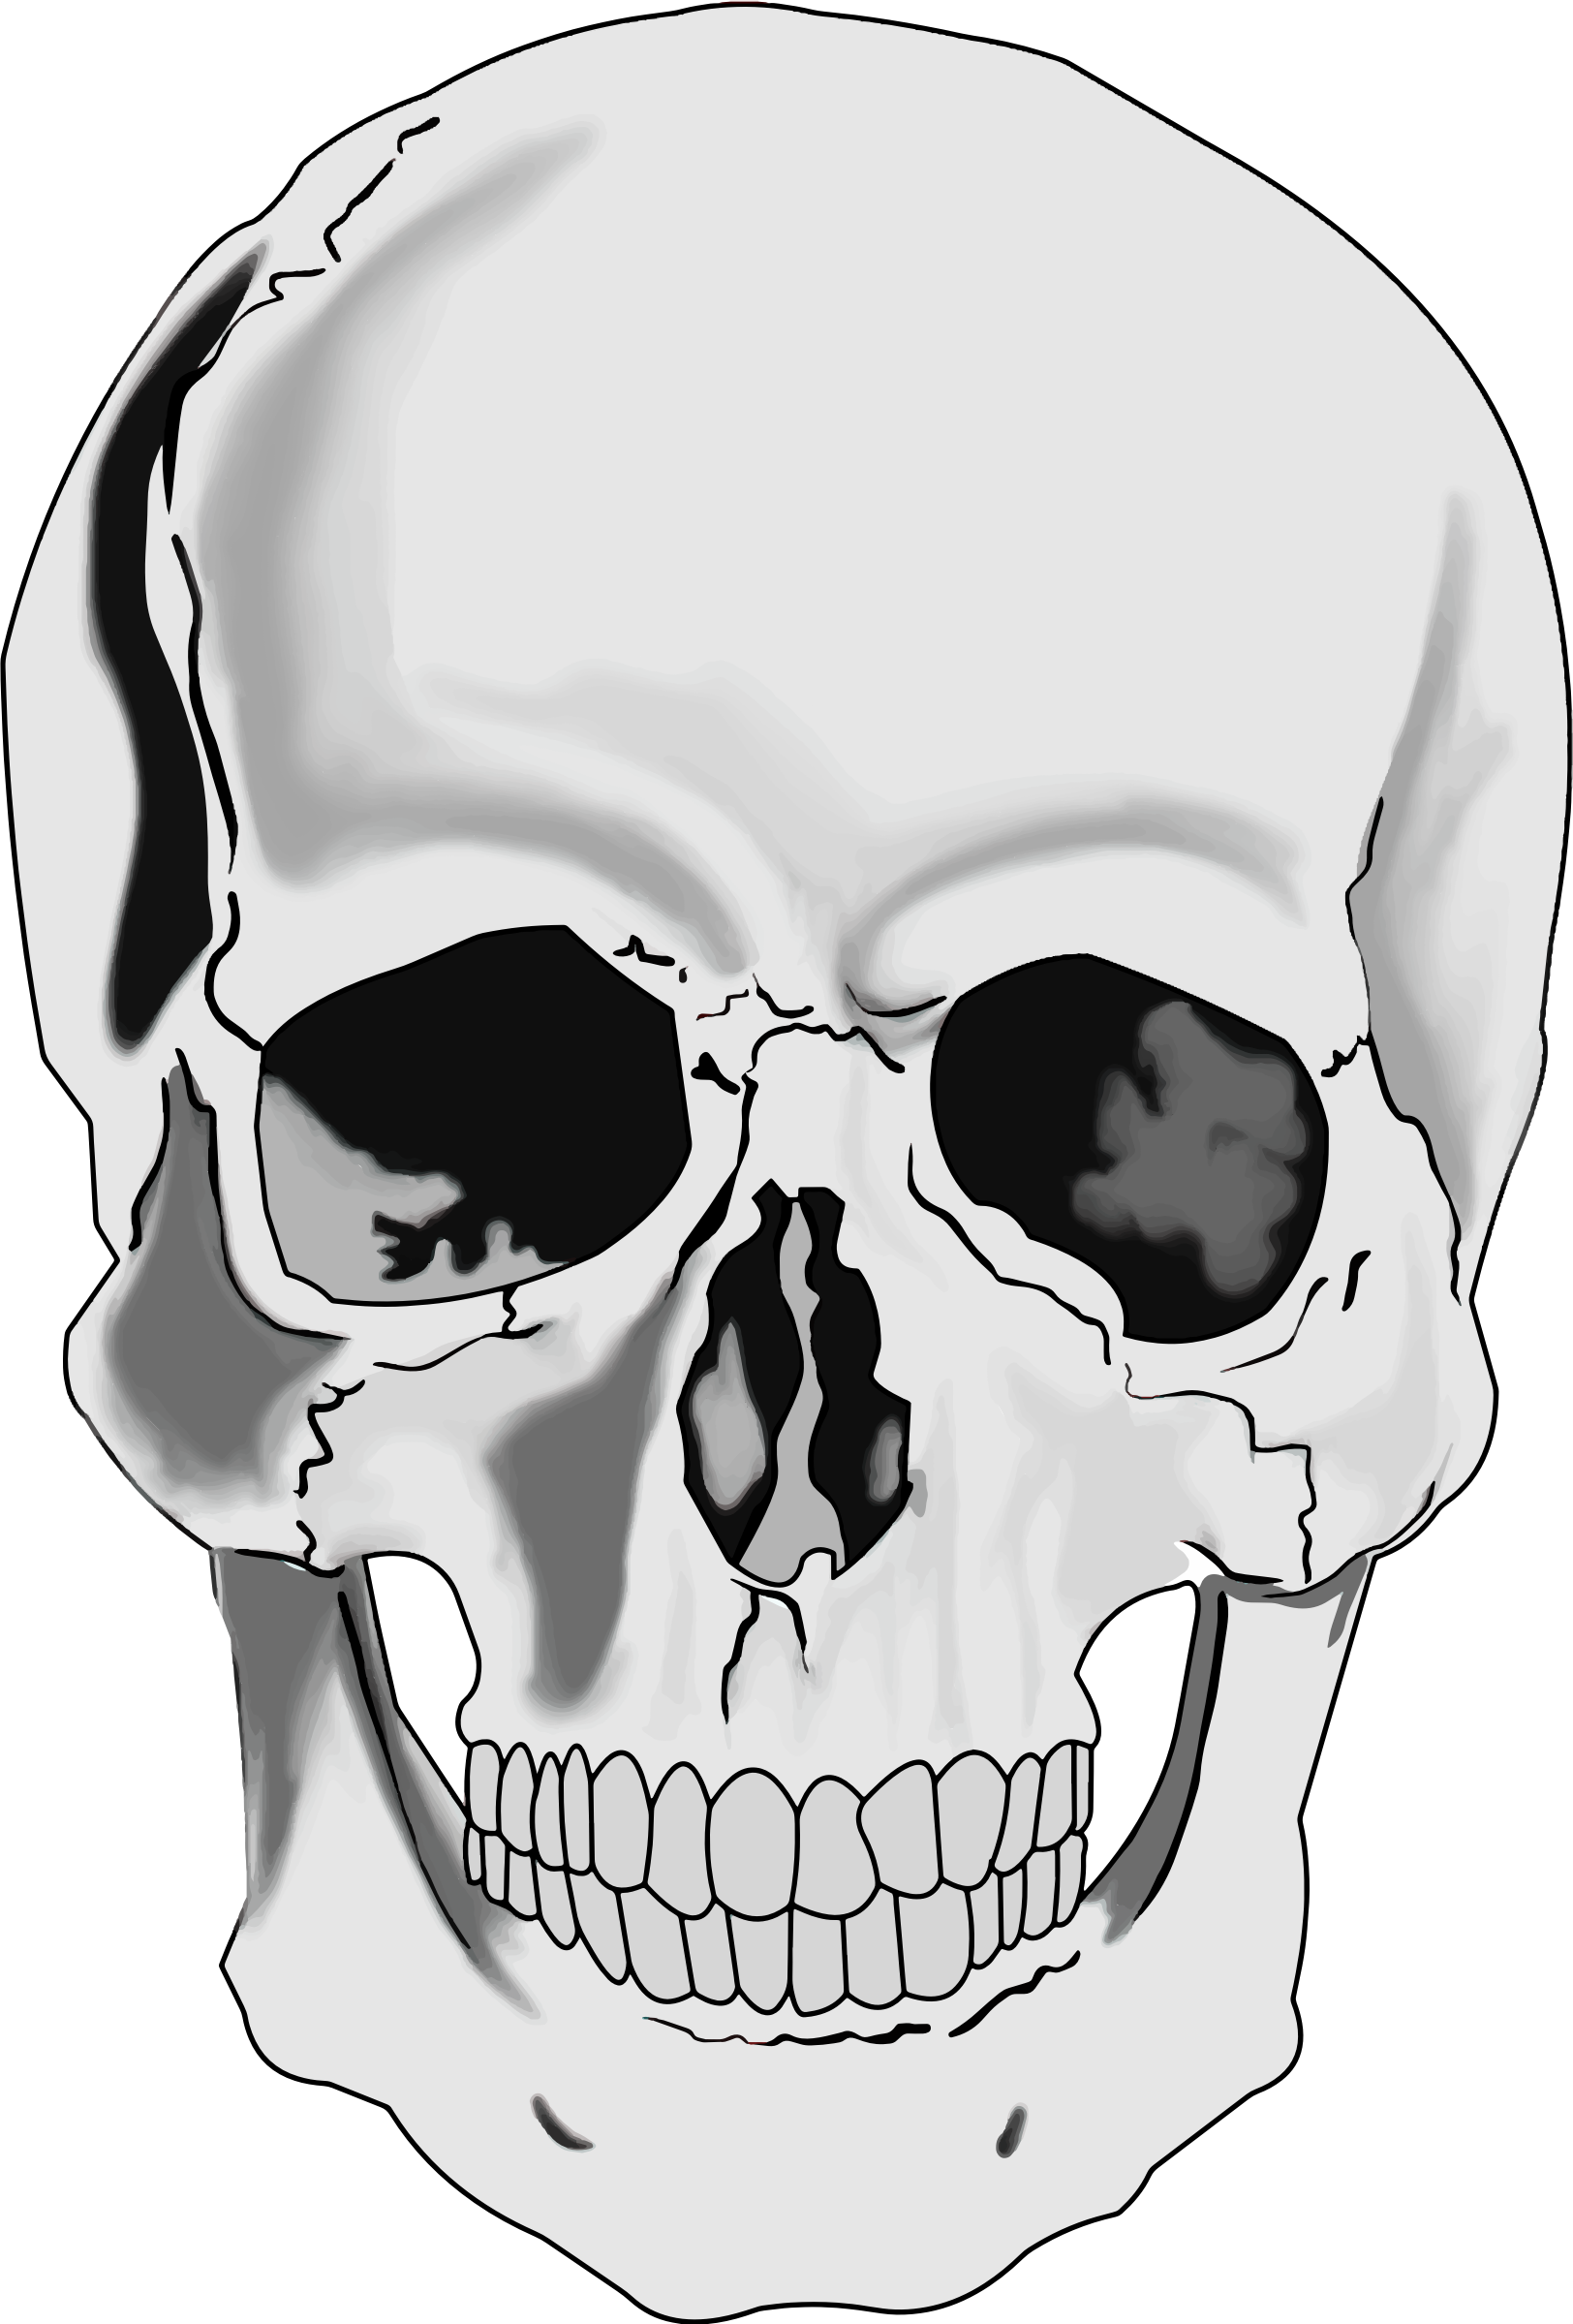 Clip Arts Related To : Good For Bad Skull Human Skull Drawing. 